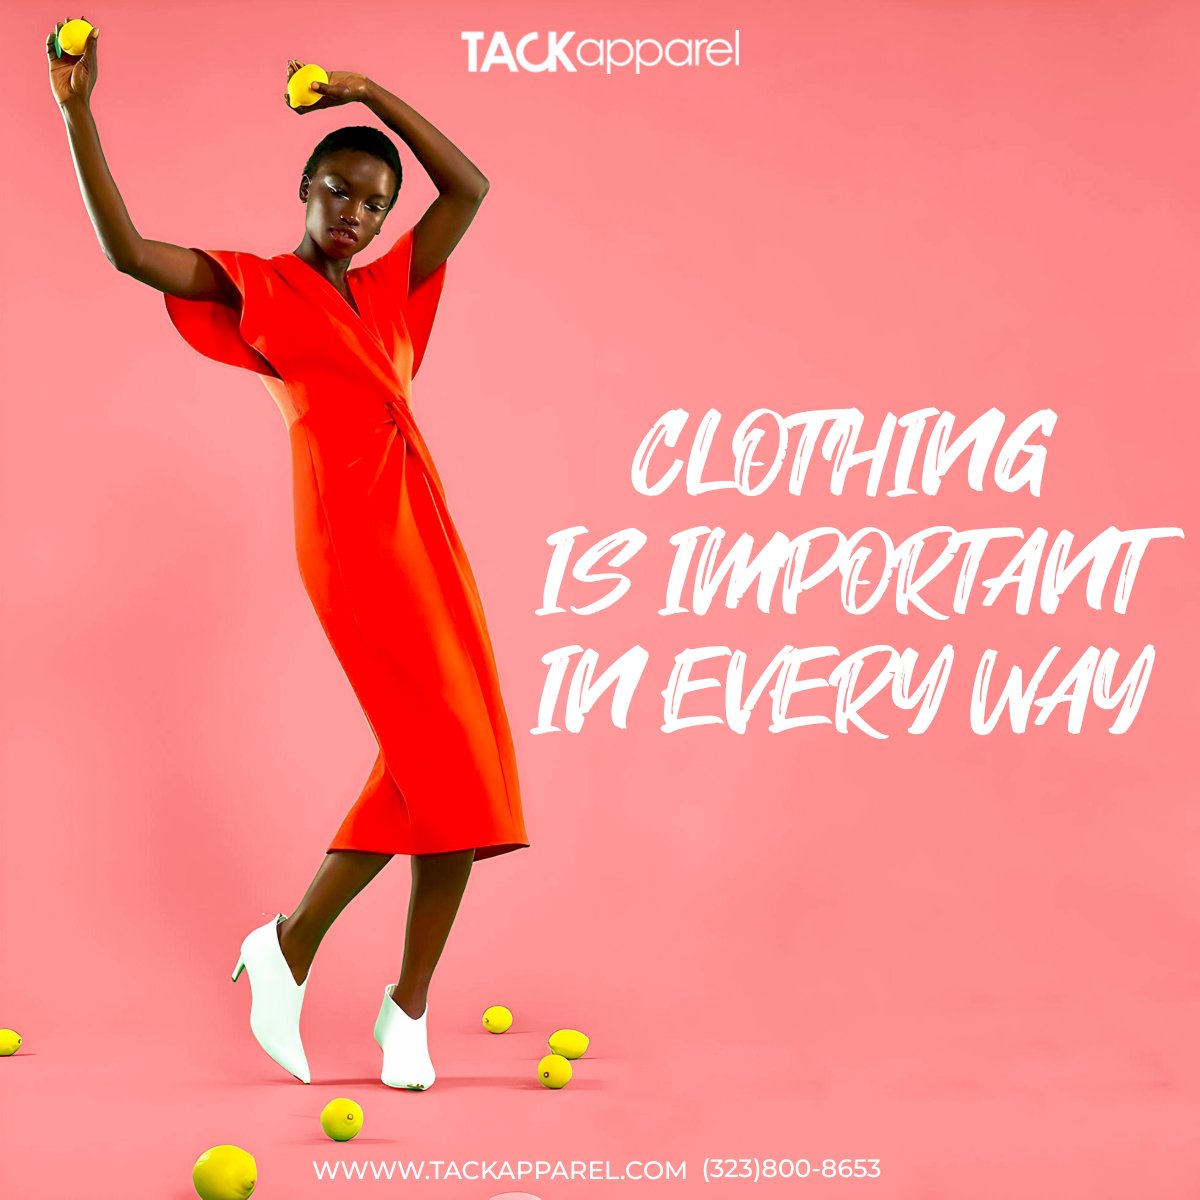 Take your clothing style to new heights with Tack apparel!

#Tackapparel #fashion #summer #apparel #style #shirtmanufacturer #customshirt #custompants